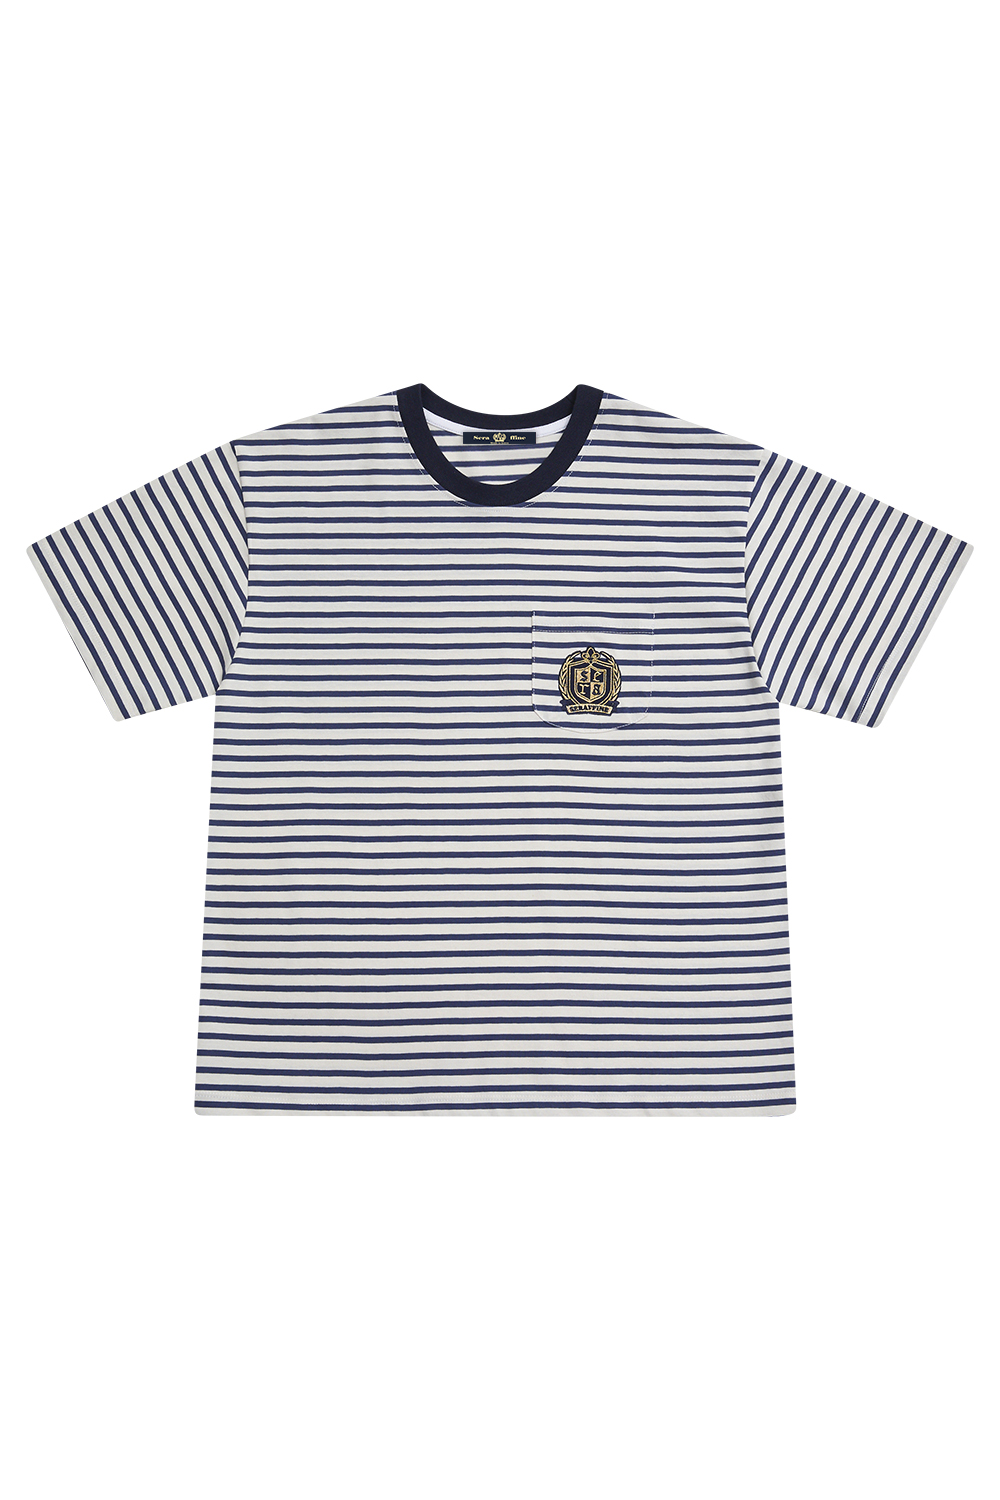 EMBROIDERED STRIPED TEE_NAVY